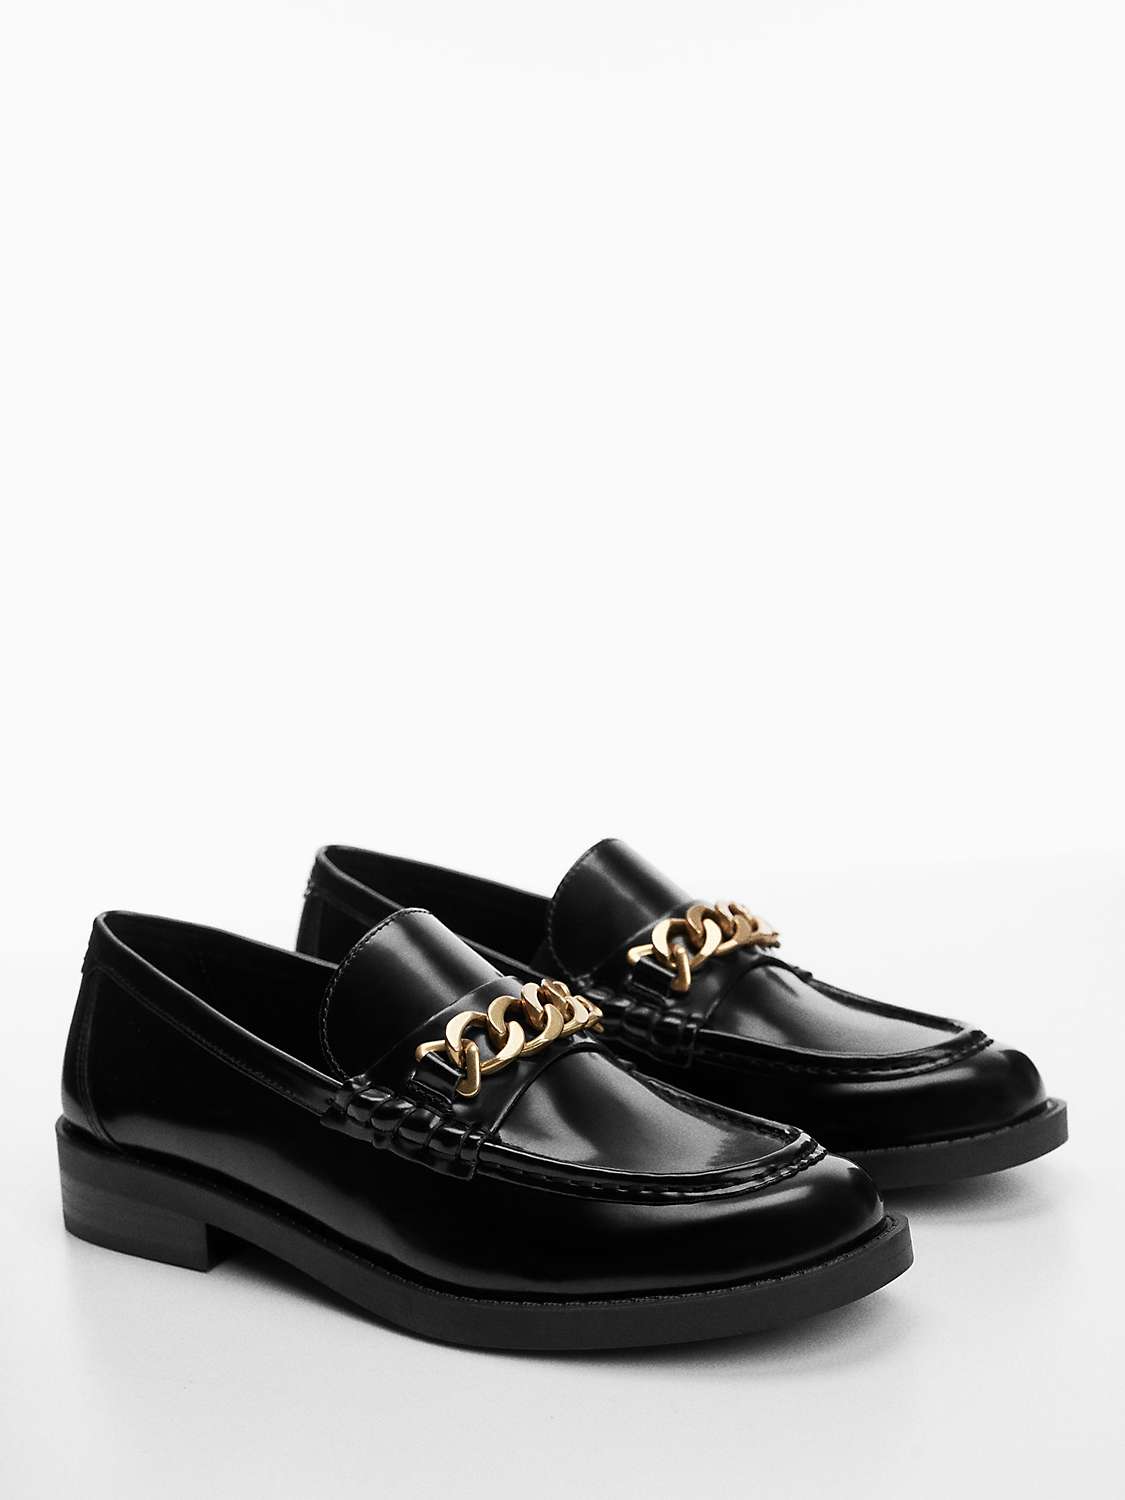 Mango Cole Chain Detail Loafers, Black at John Lewis & Partners